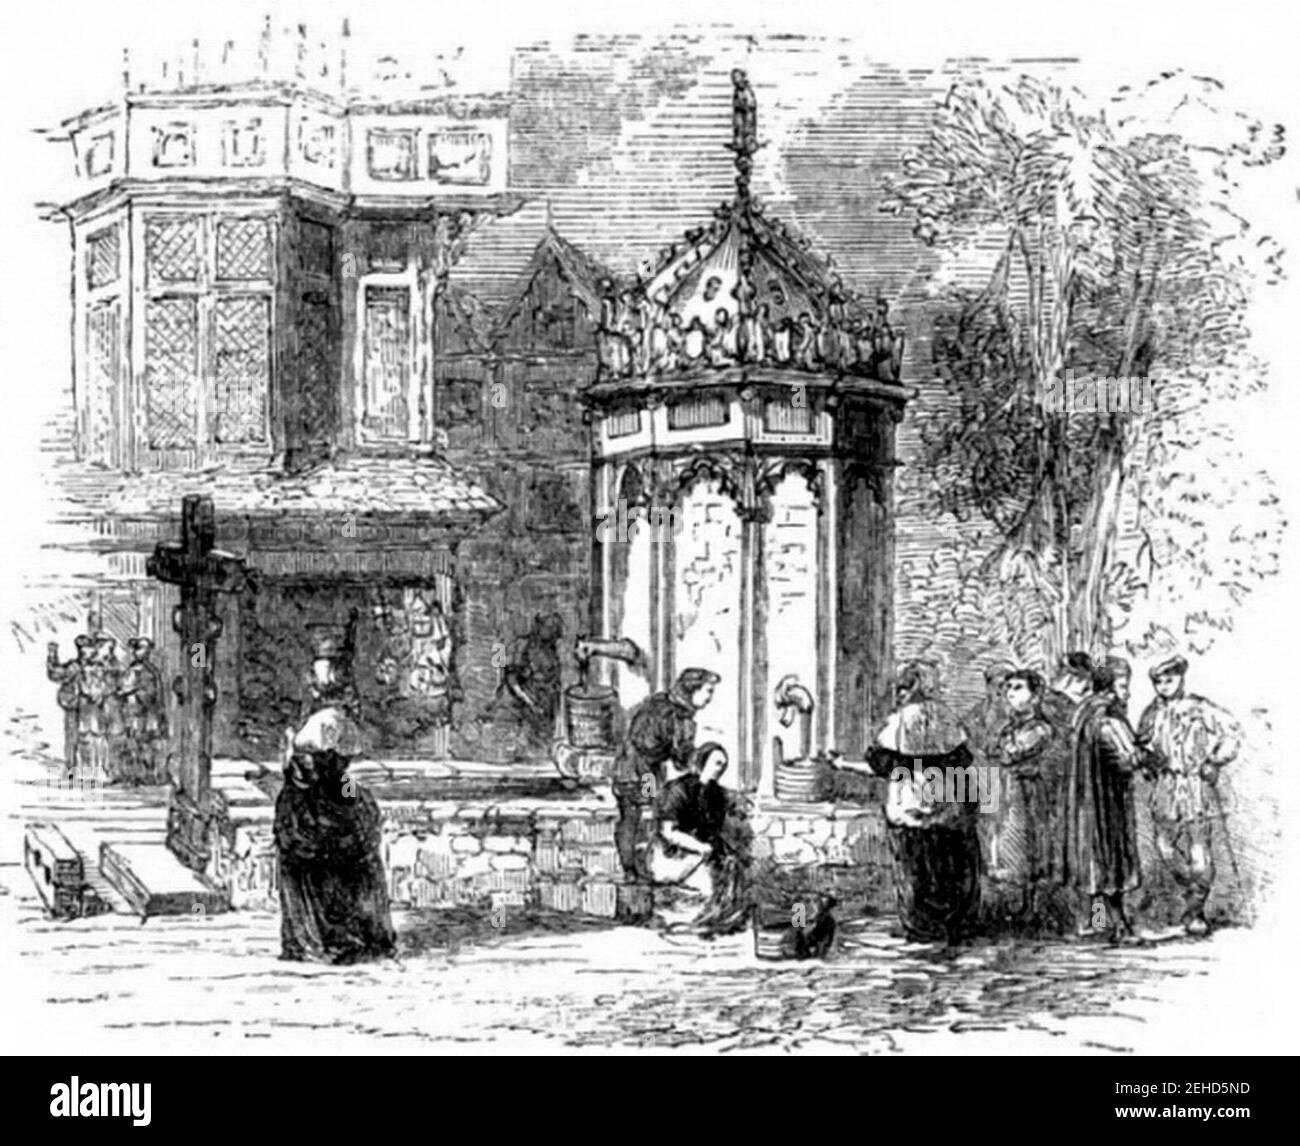 P288 Conduit in London Streets, with Stocks, Pillory, and Whipping Post. Stockfoto